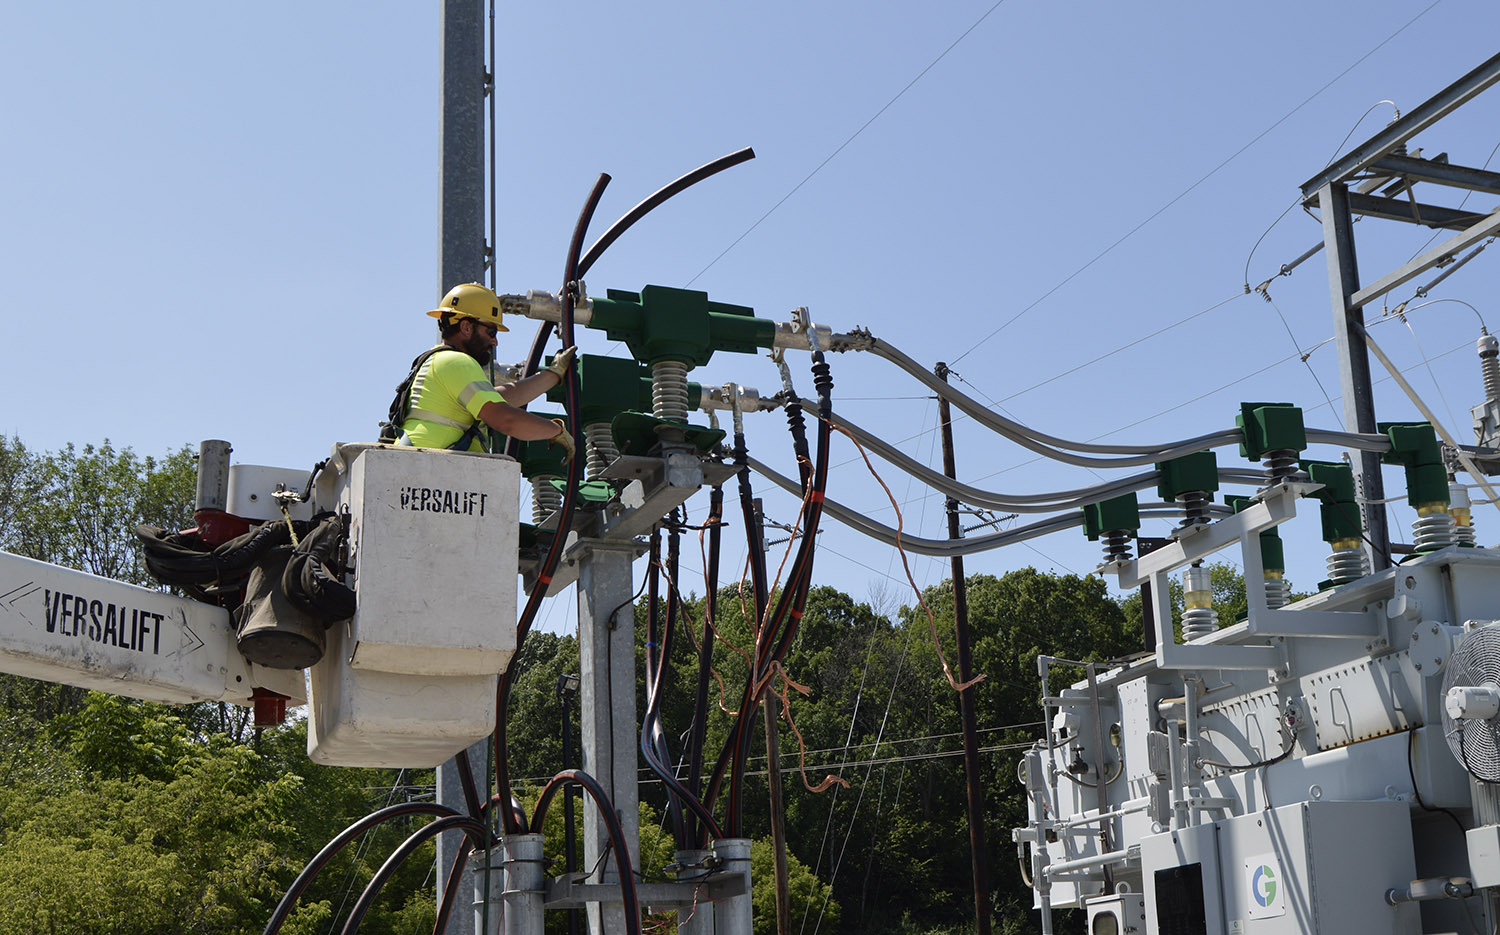 An electric worker in a cherry picker working on some electrical equipment